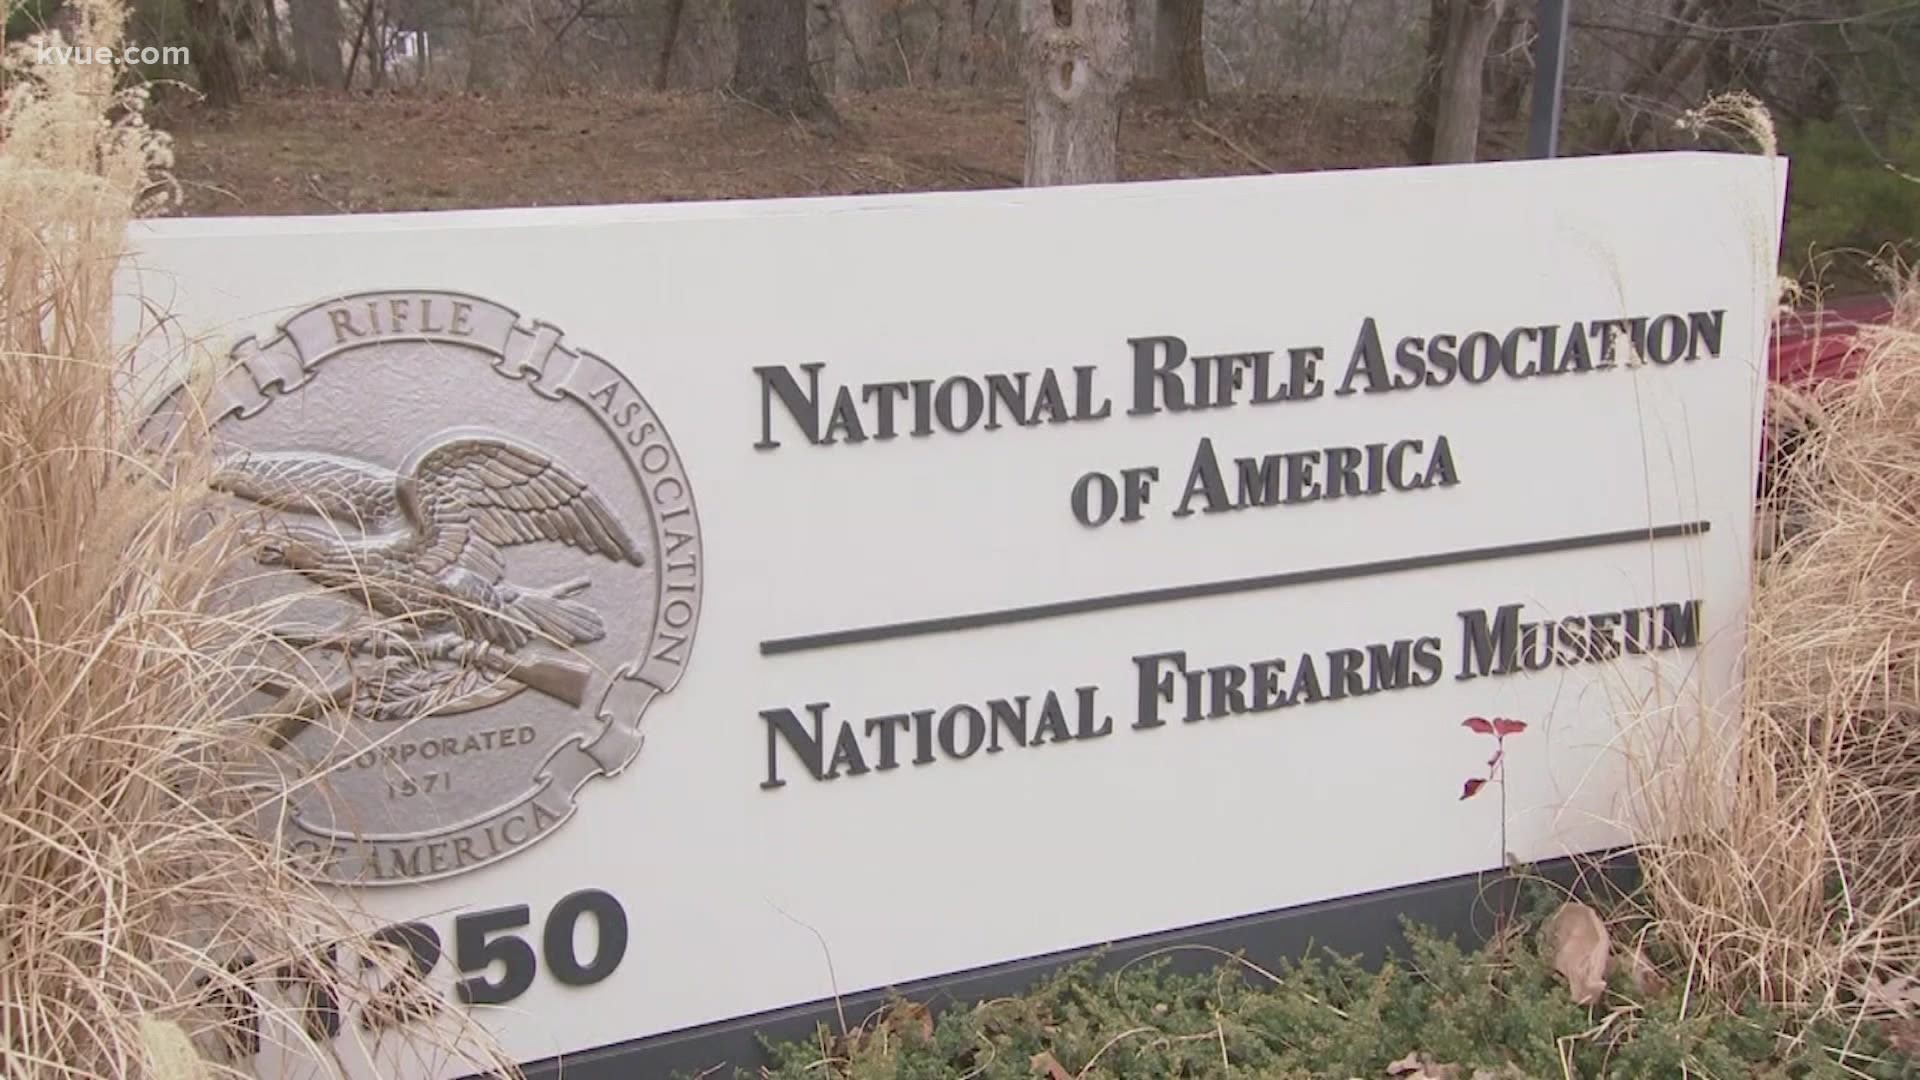 The National Rifle Association has filed for chapter 11 bankruptcy and plans to restructure as a nonprofit and move to Texas.